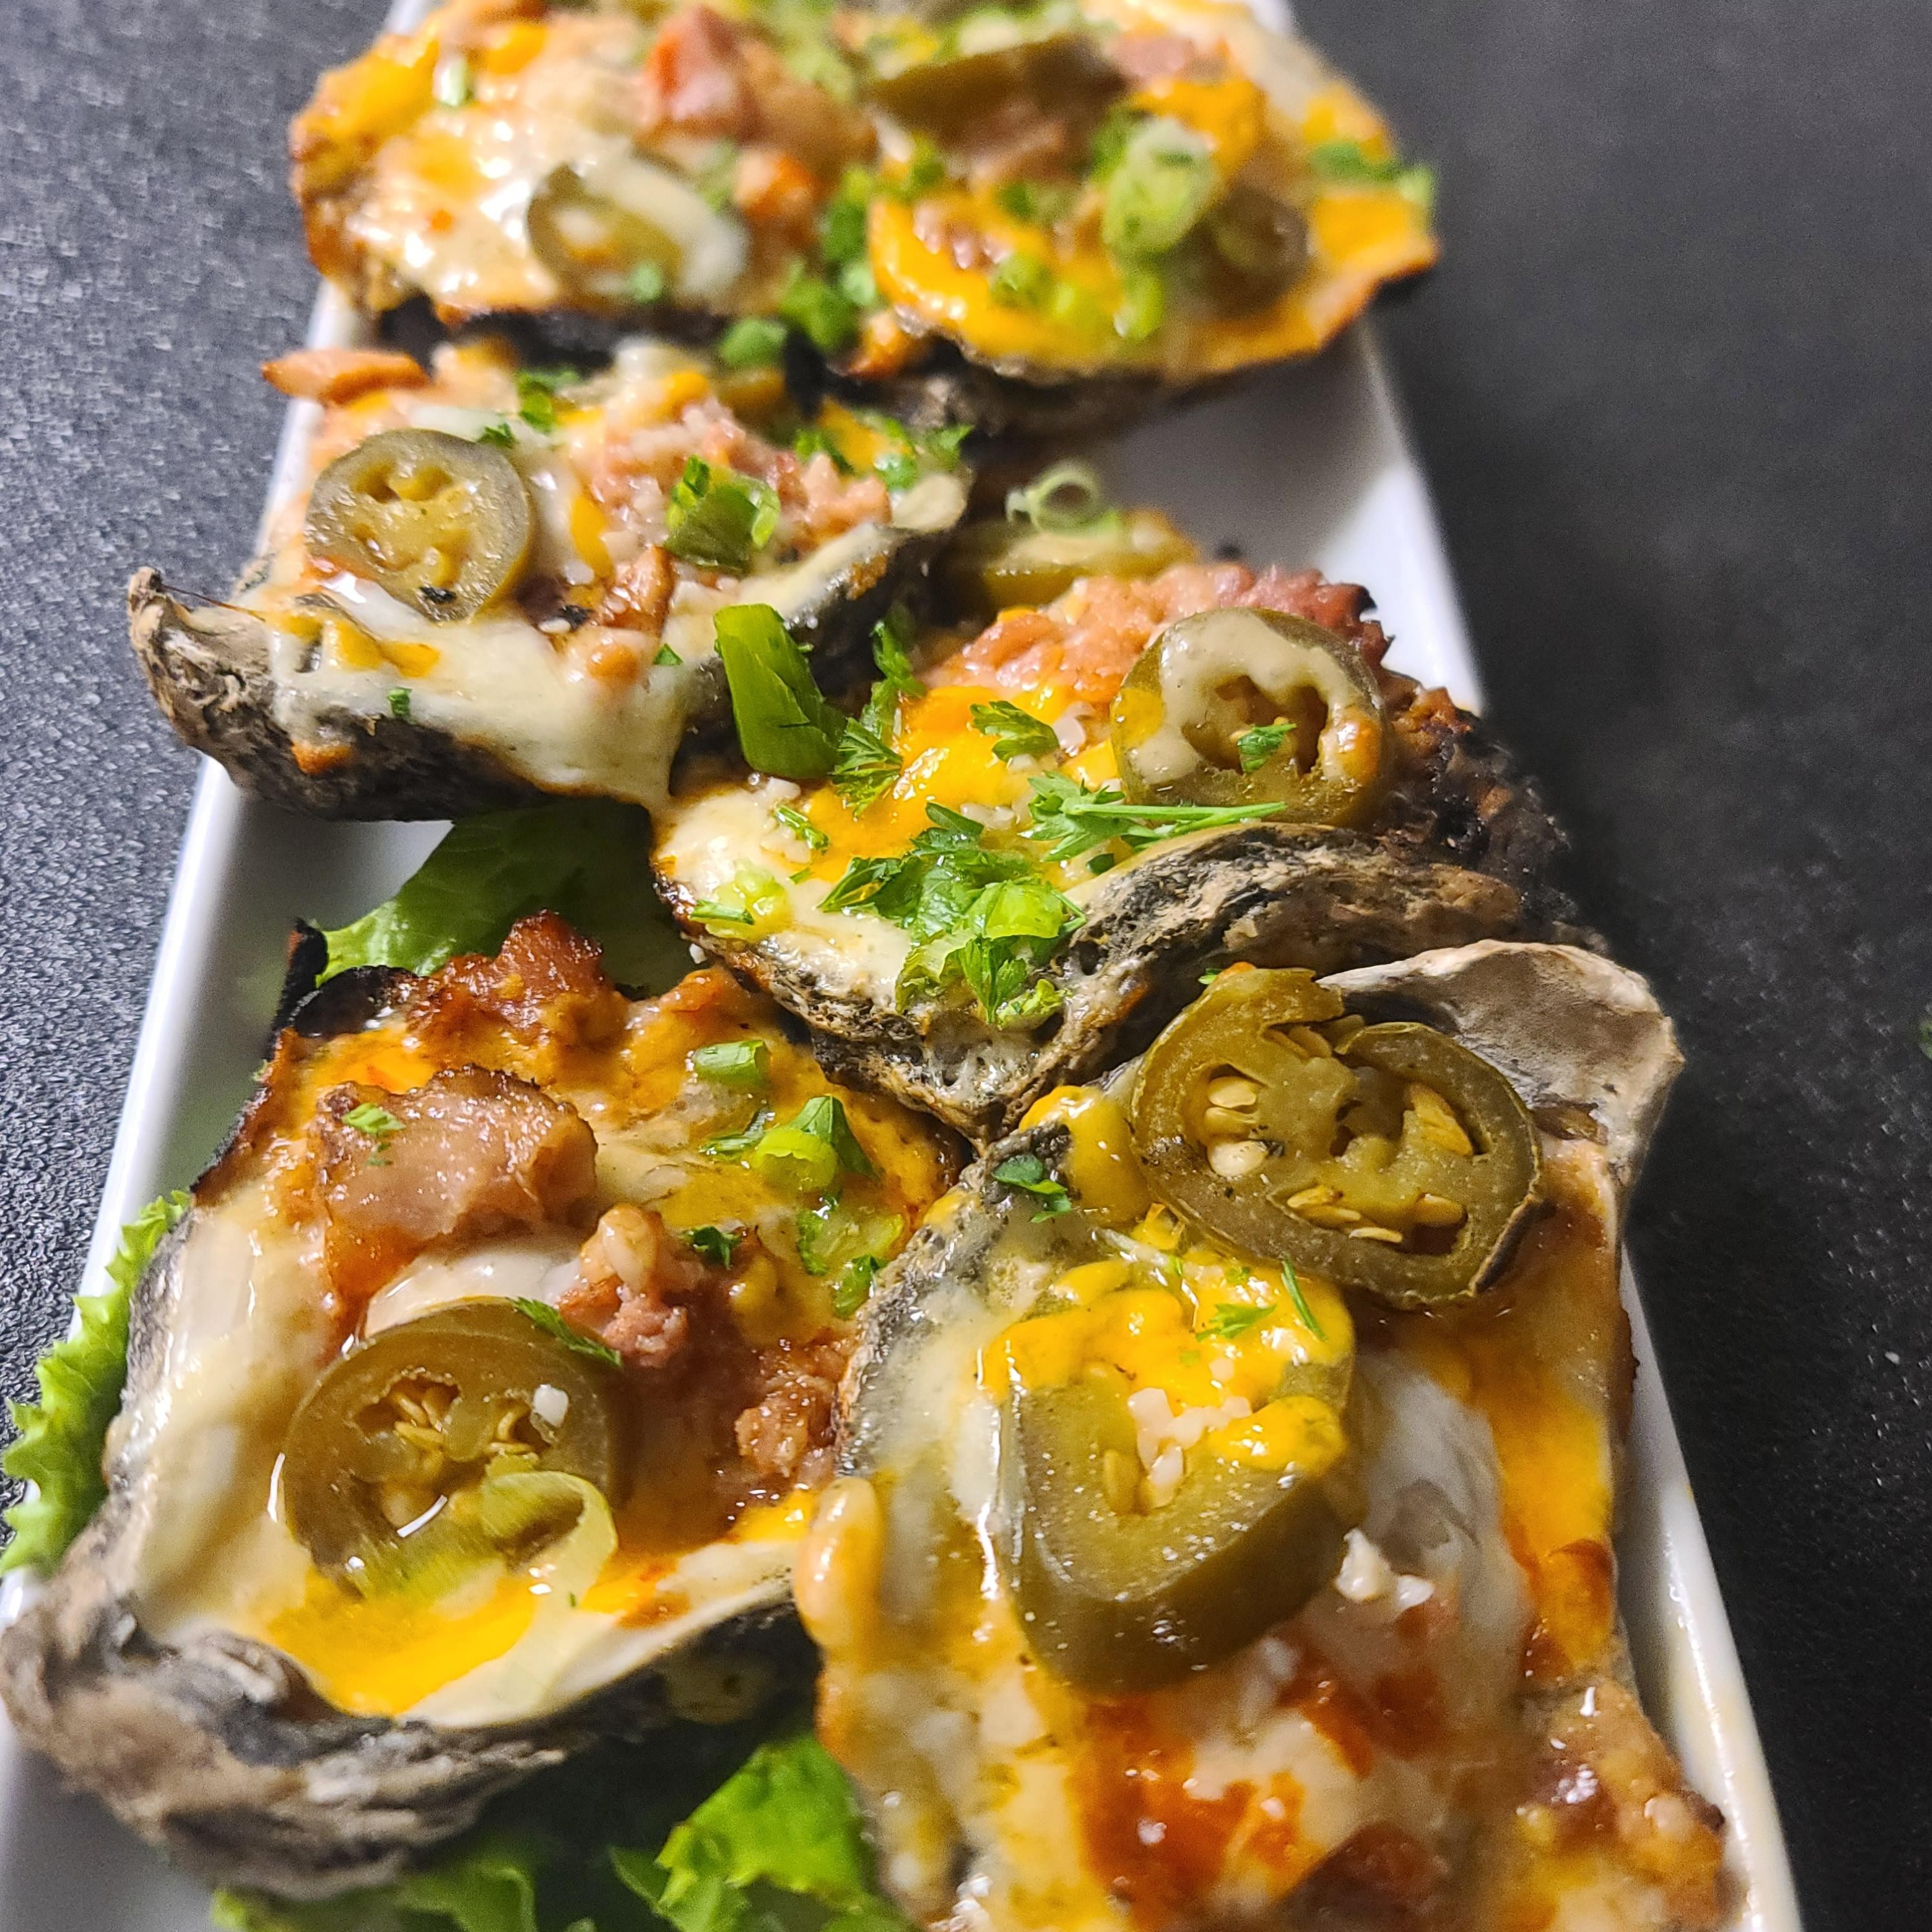 JALAPENO CHEDDAR OYSTERS